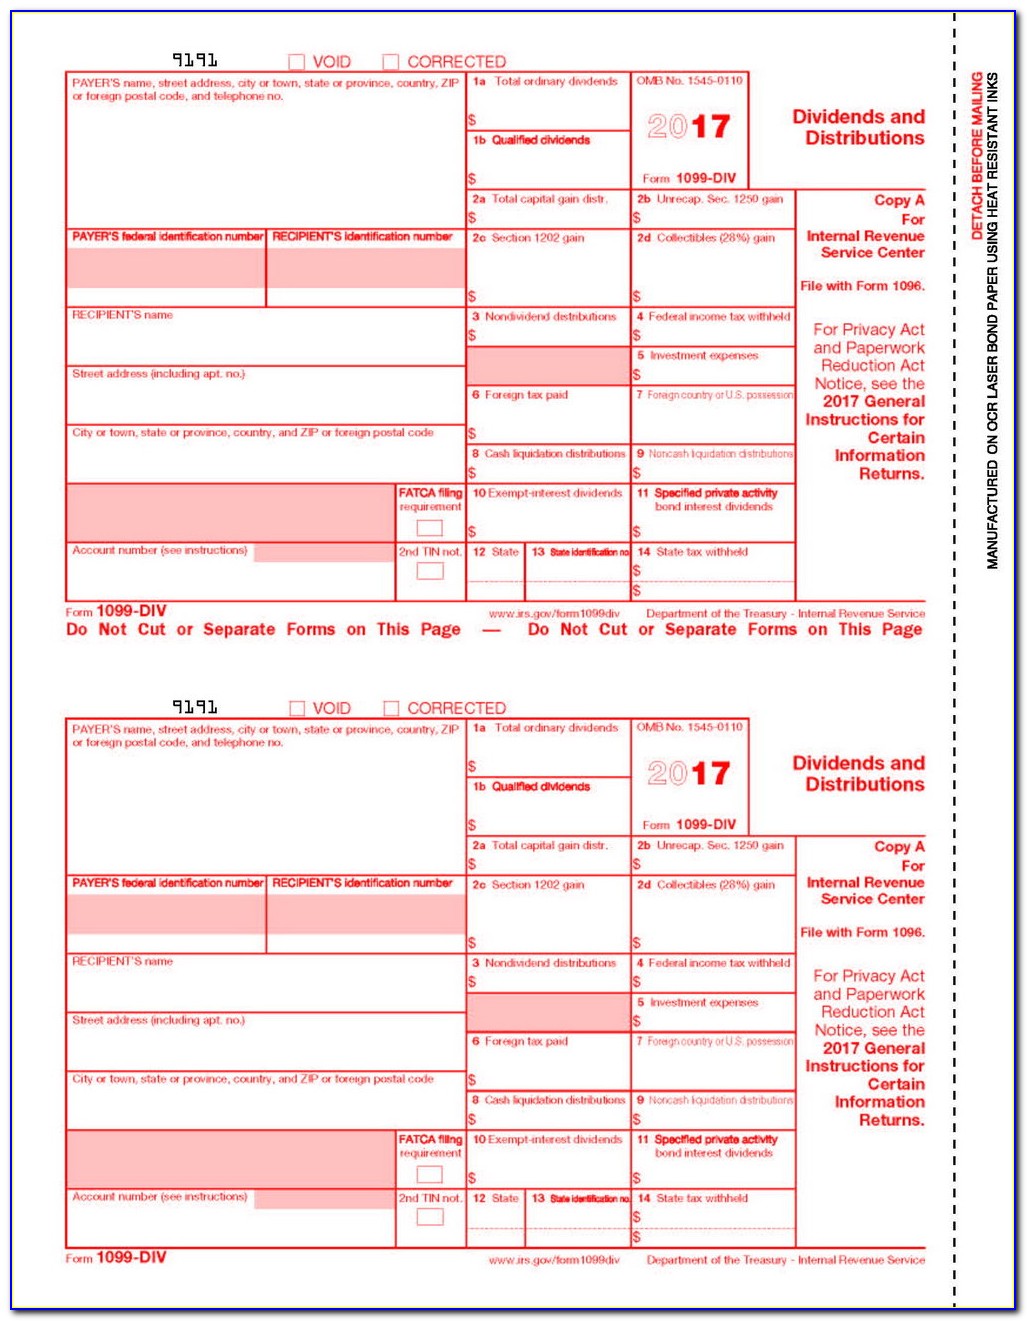 Download Free 1099 Misc Form 2017